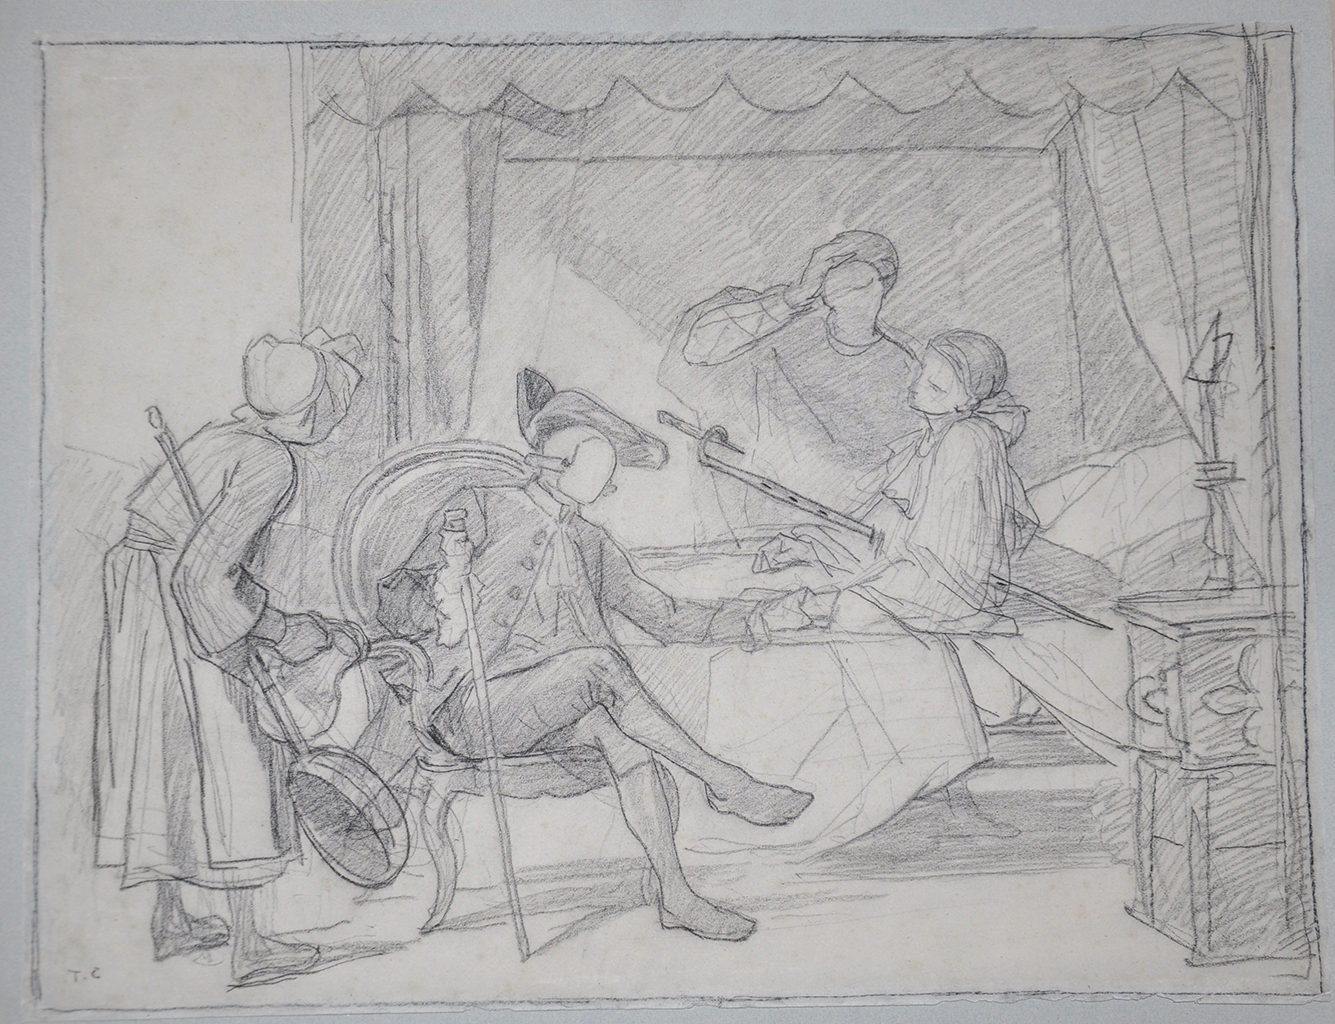 An early sketch depicts a group of lightly drawn people surrounding a woman who is lying in tall bed with another person standing on her side. One male figure sits with his legs crossed in a chair while another woman leans in behind him.